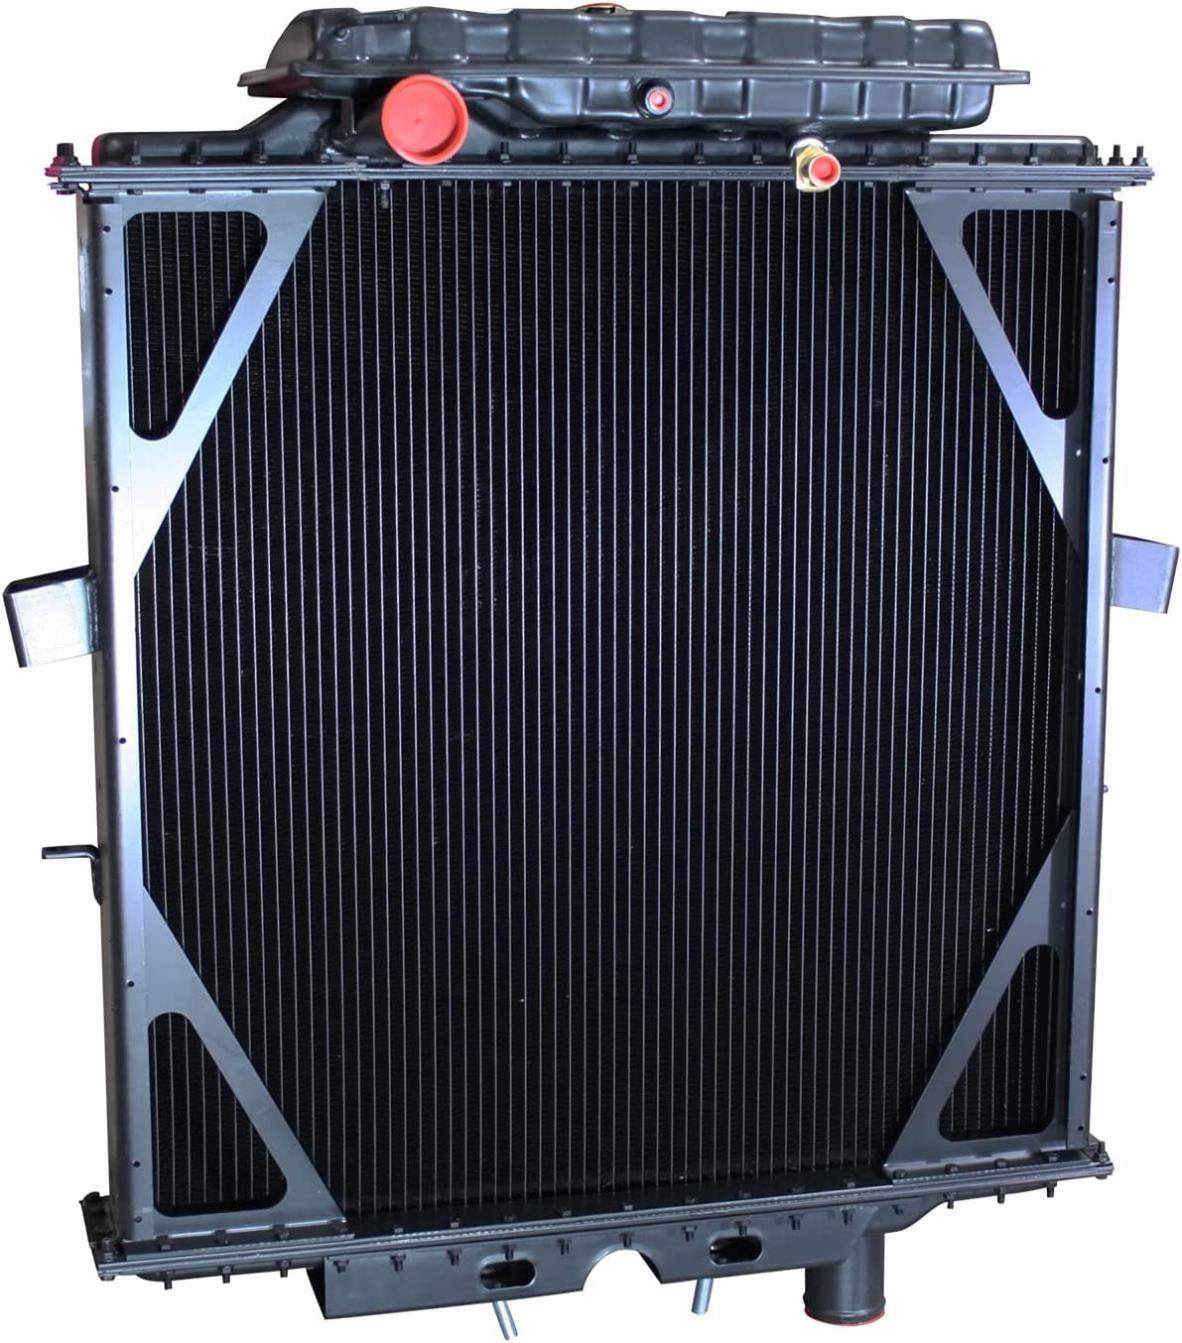 Radiator Compatible With Peterbilt 357 377 378 379 Models 4 Rows of Cooling Replaces OEM Part Numbers Listed Only 0706657A013